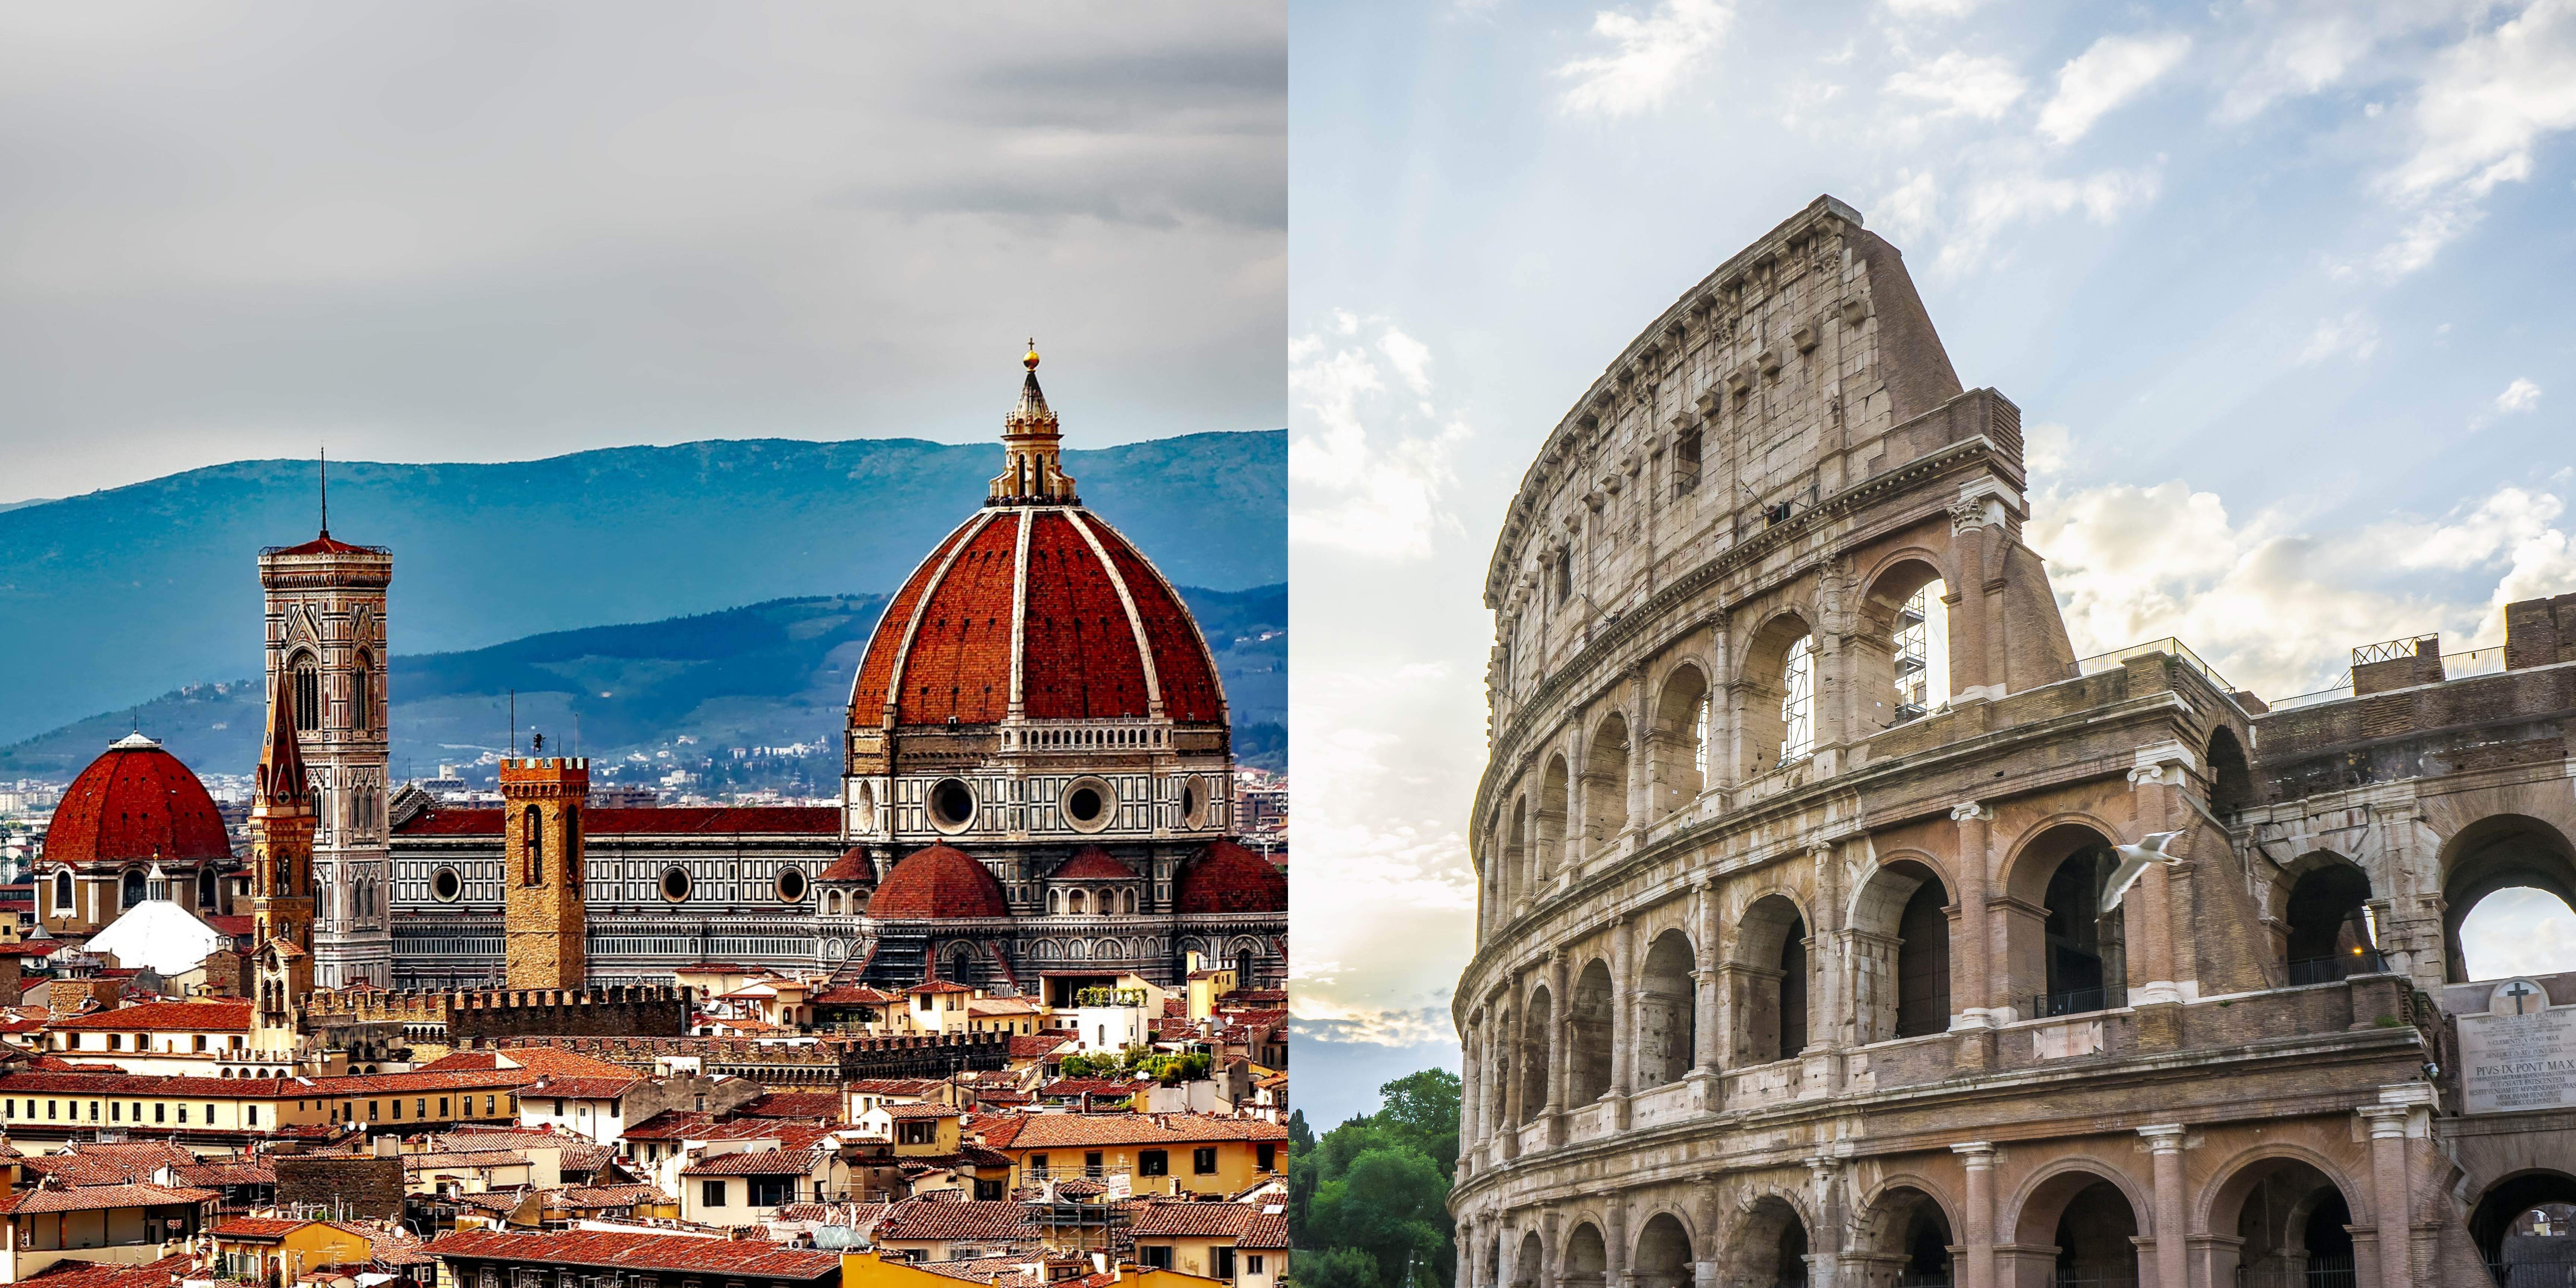 How to Get from Florence to Rome